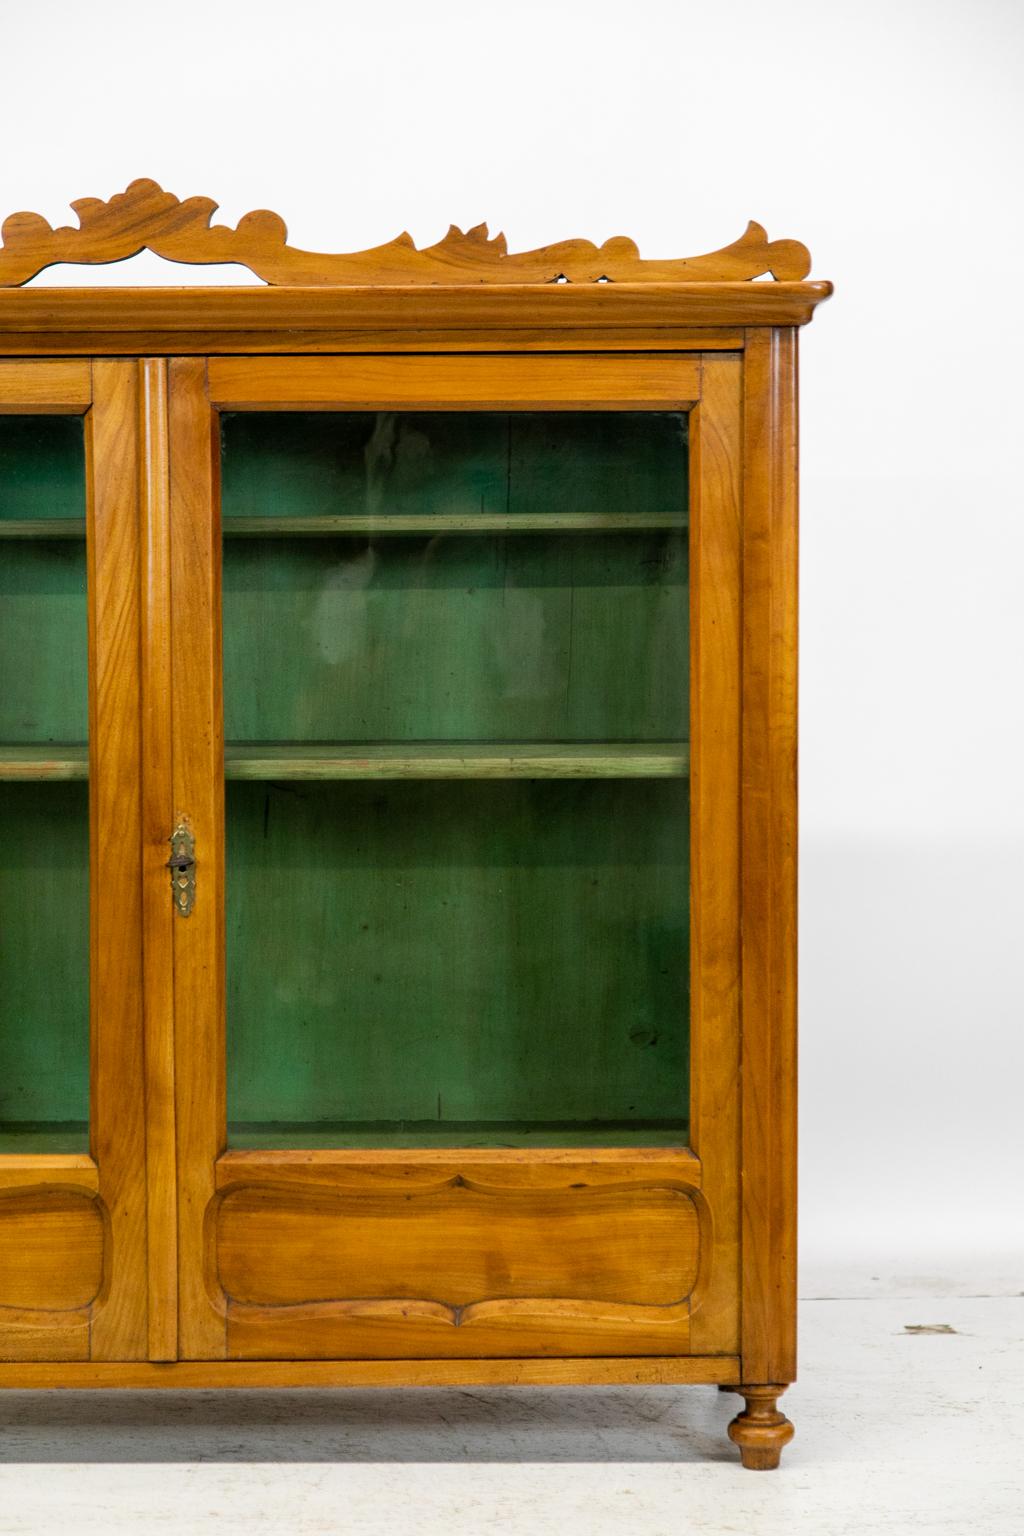 English fruitwood cupboard/cabinet has an applied carved crest. The doors have shaped molded lower panels that hide two interior drawers. The interior has the original green paint. The doors have old wavy glass panes framed with beveled interior